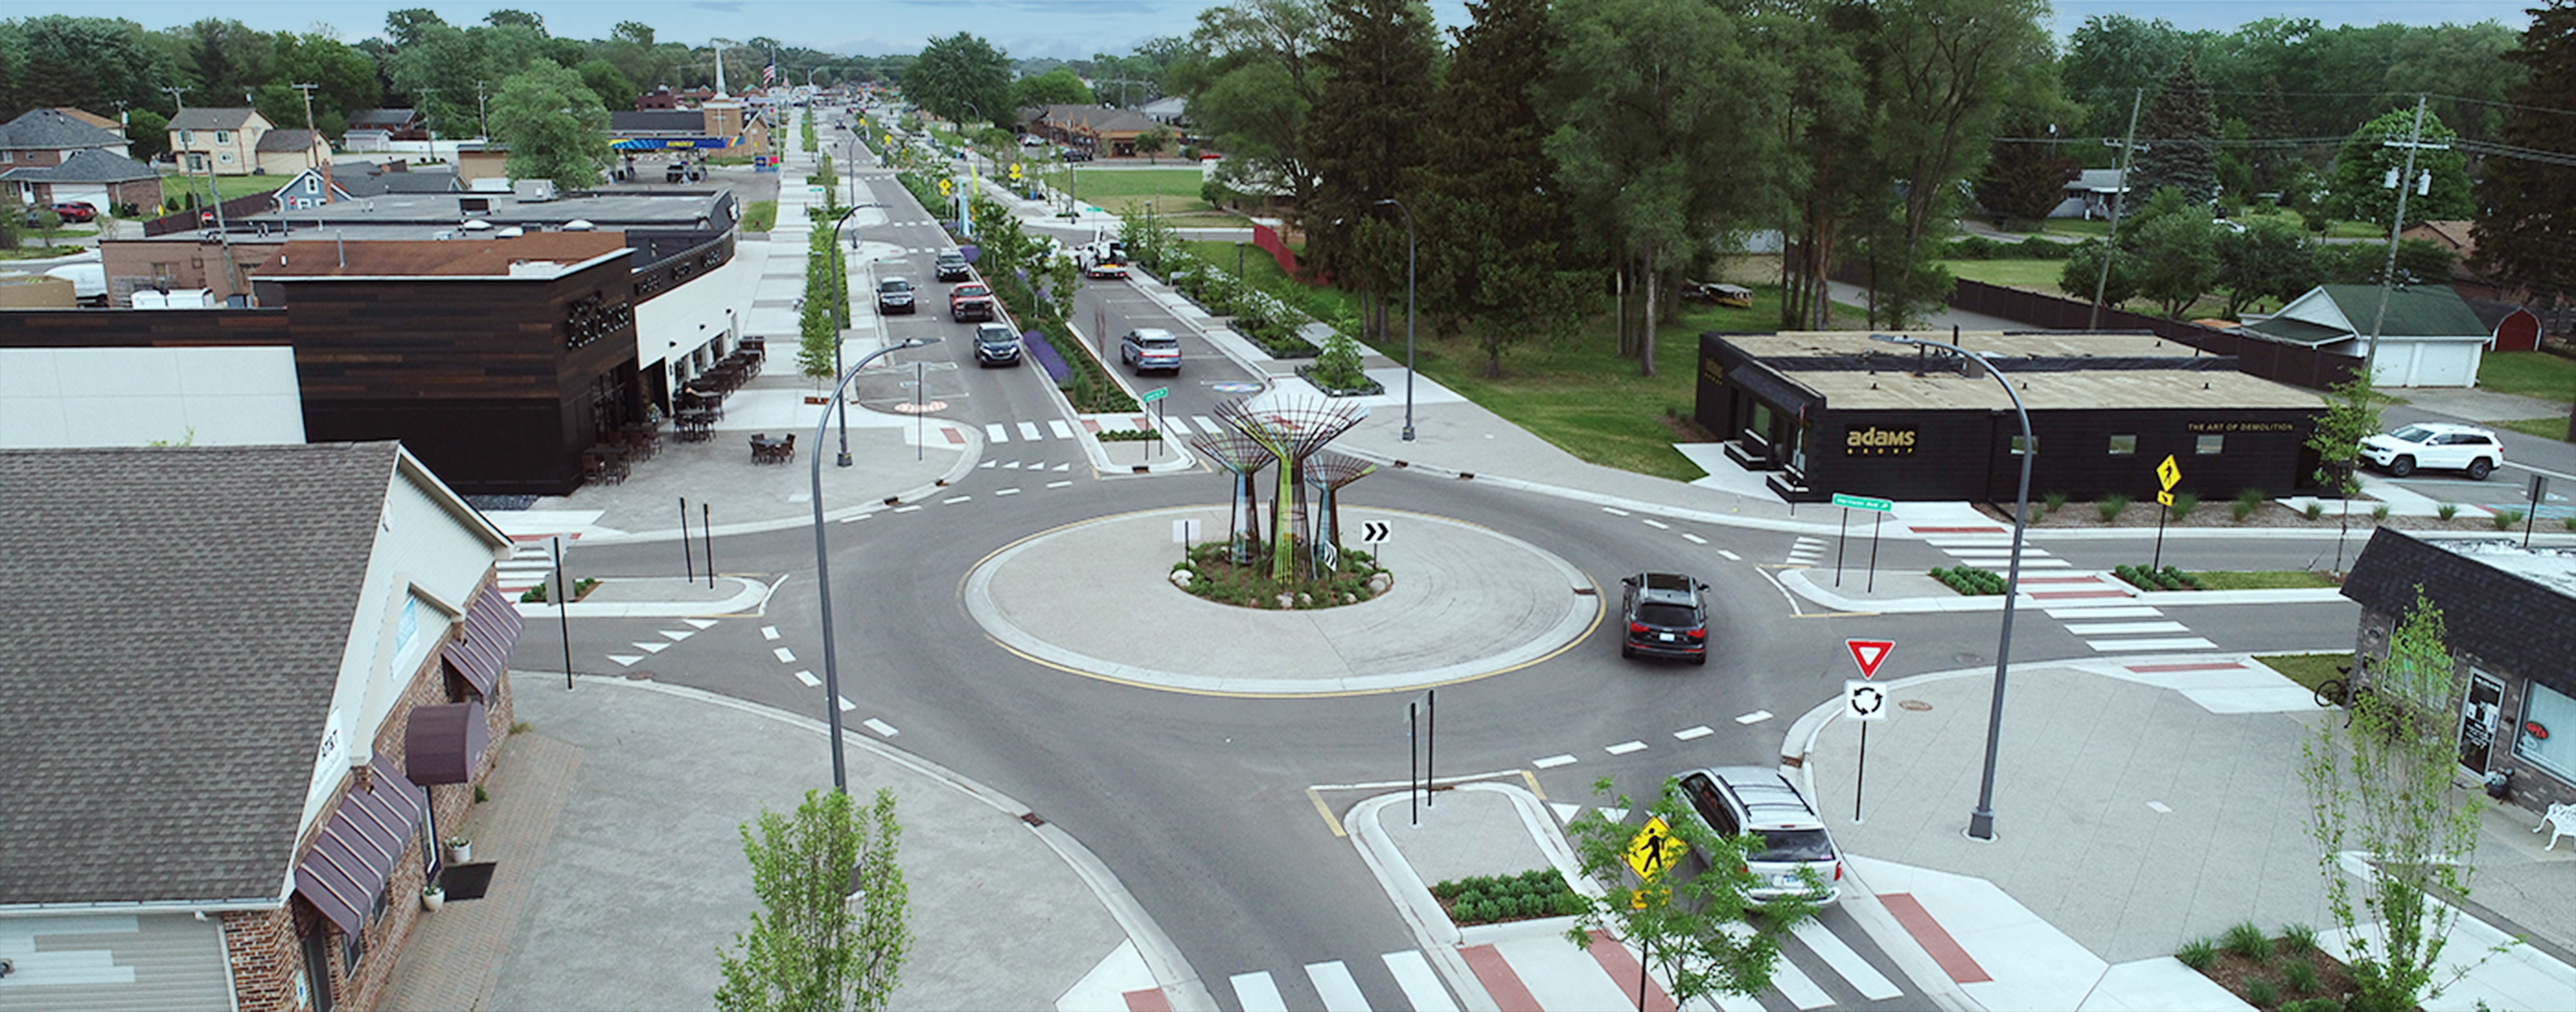 One of the roundabouts and new pedestrian crosswalks on Auburn Road.